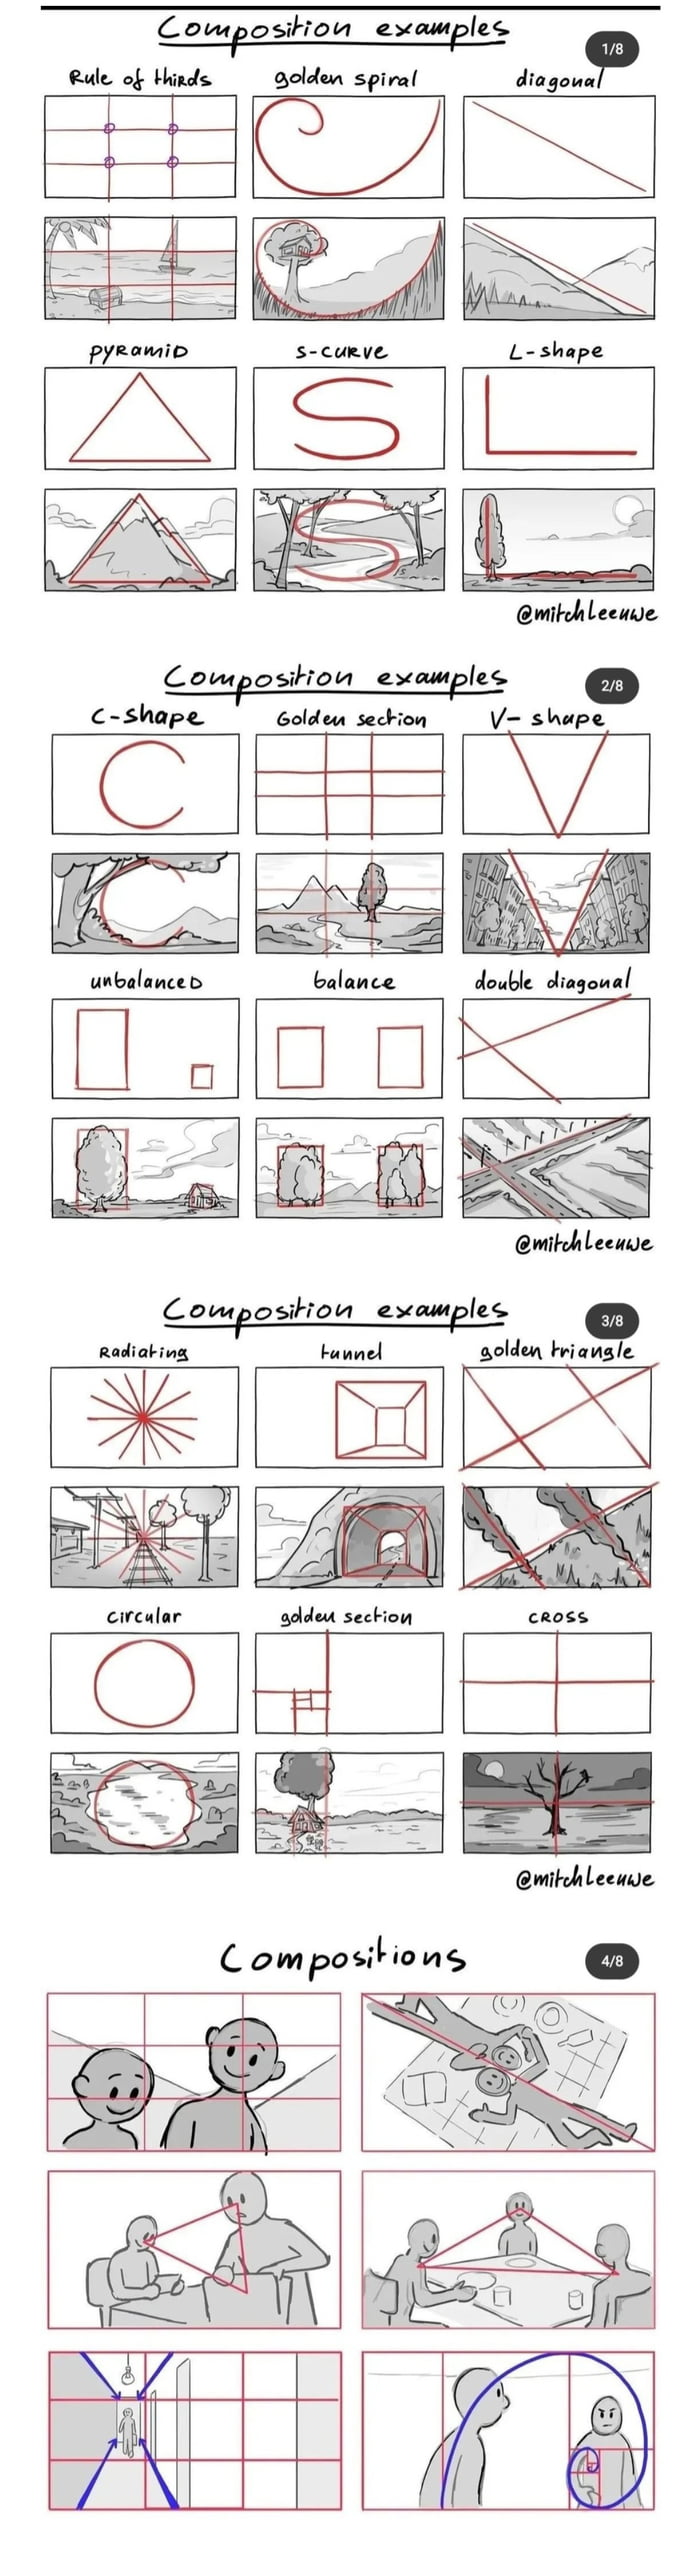 Composition examples - Photography